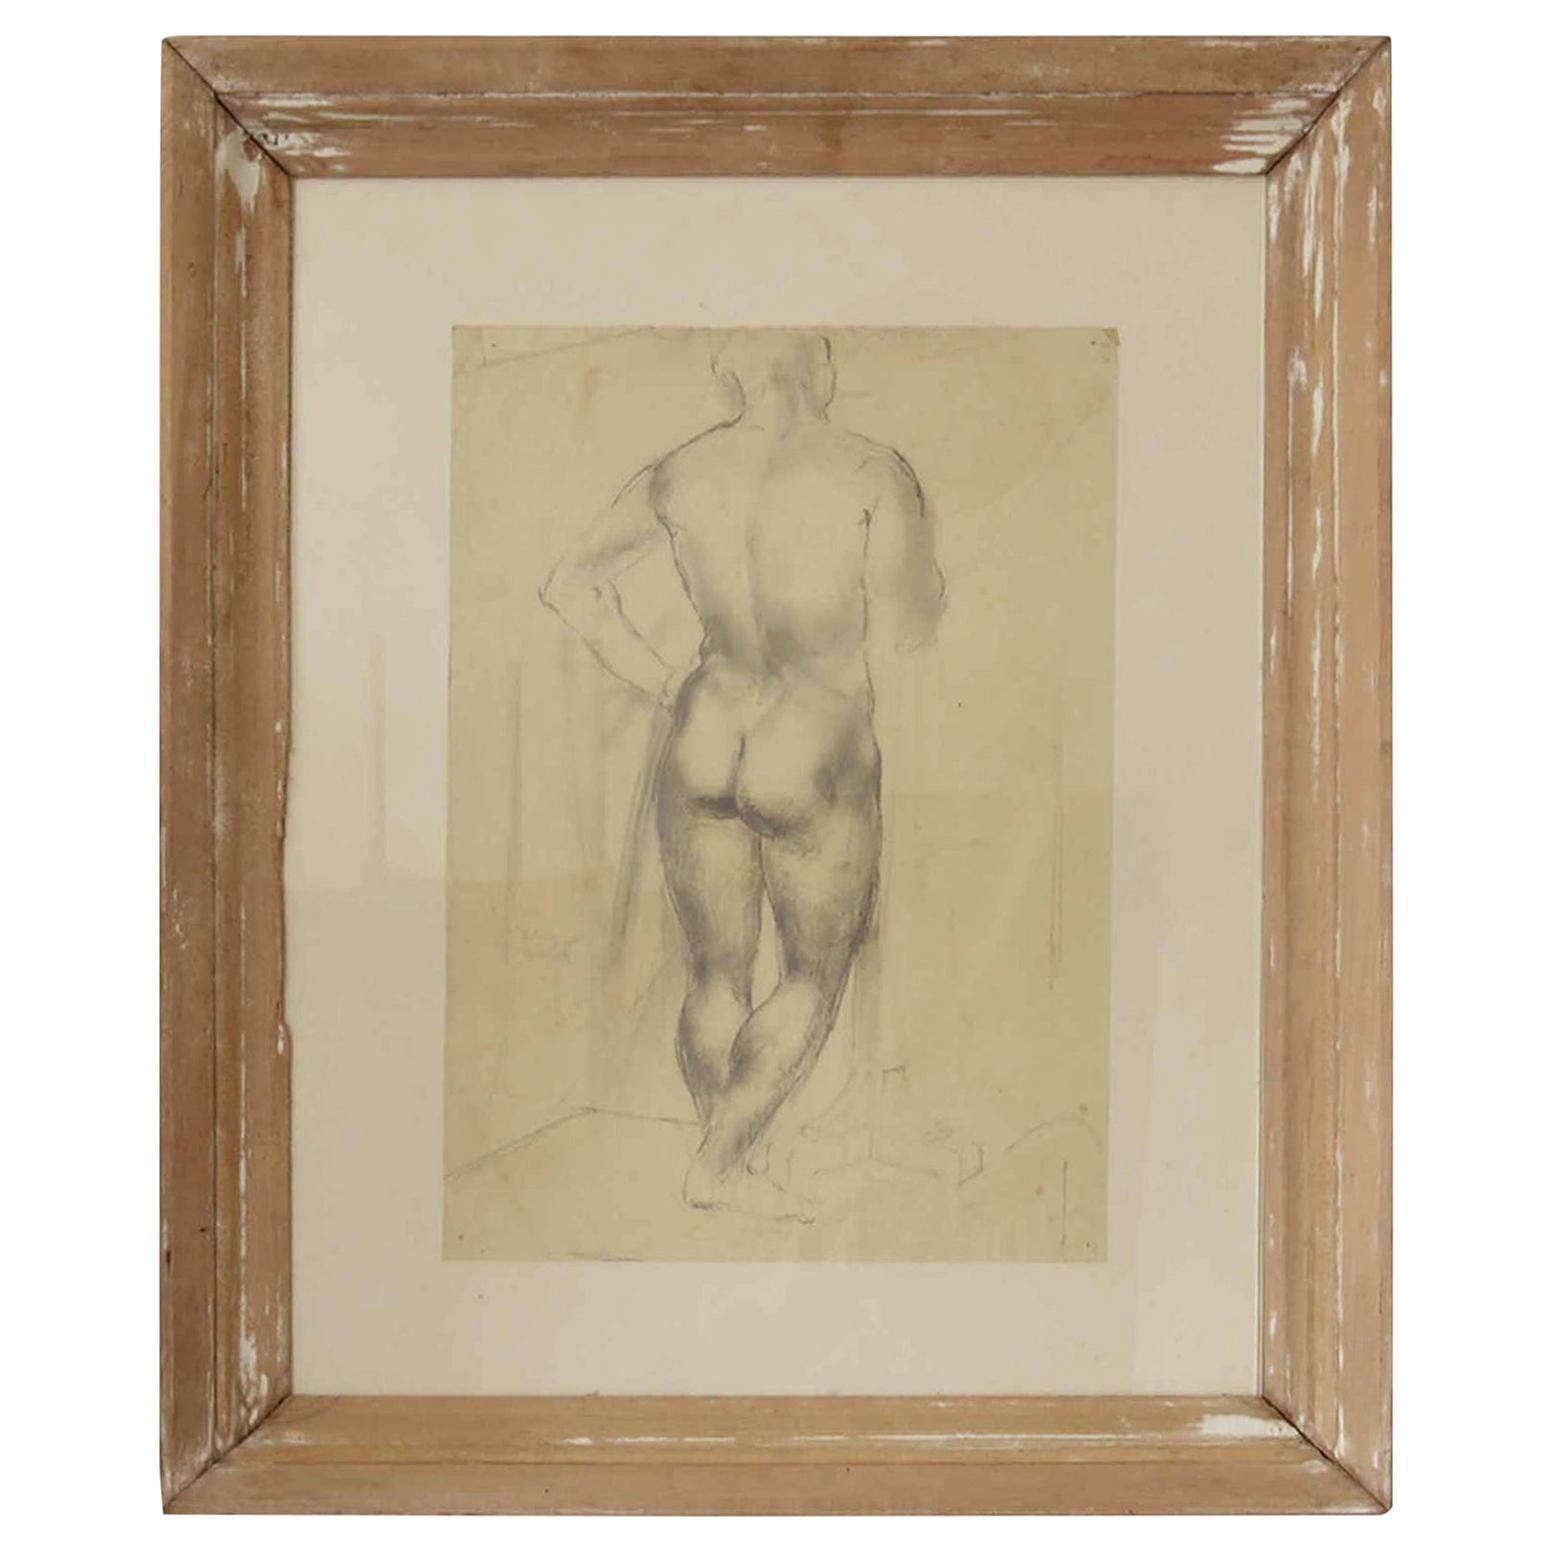 Drawing of a Male Nude by Peter William Ibbetson, circa 1930